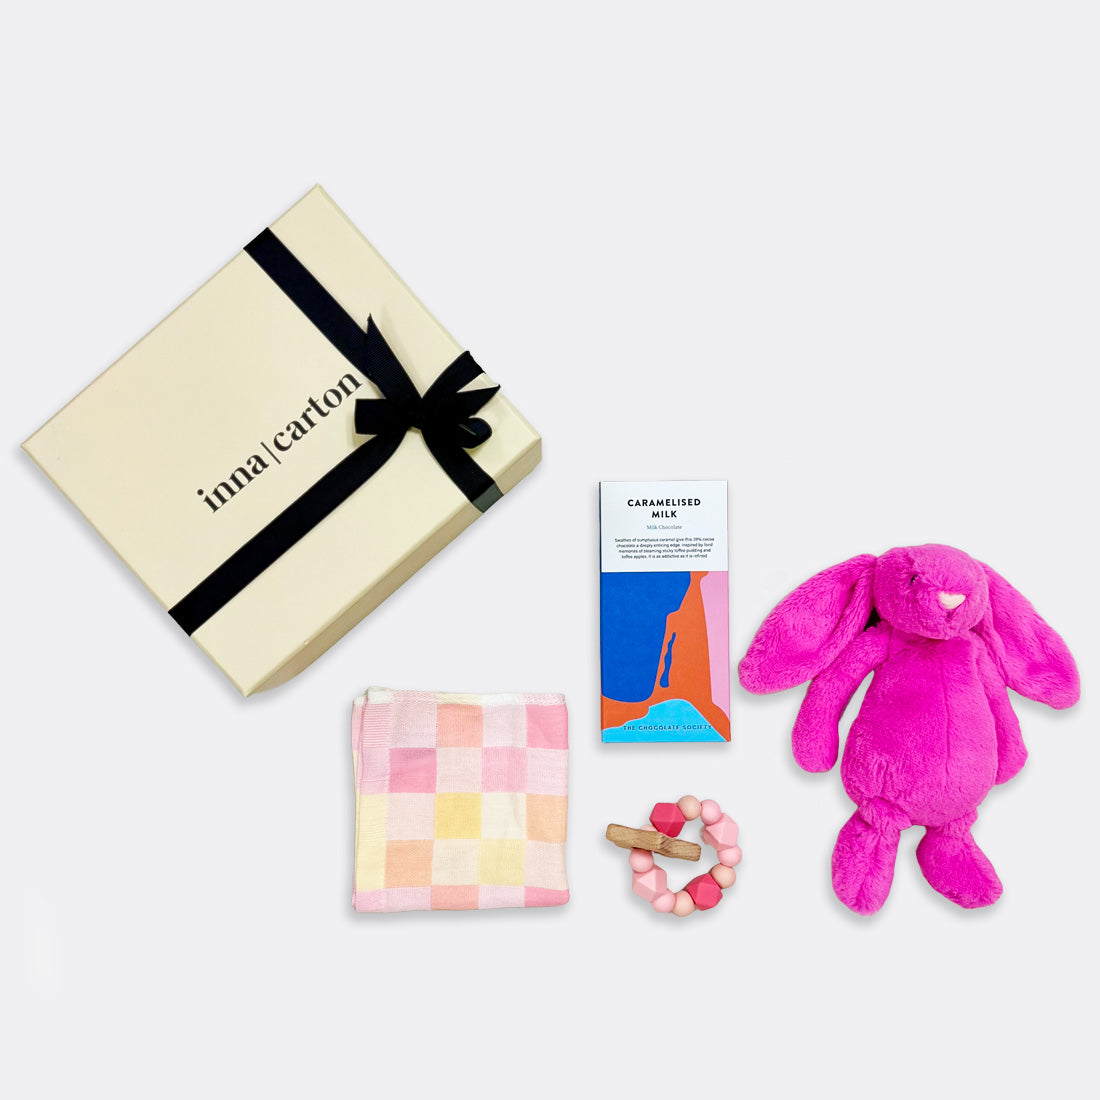 Bashful Bunny Soft Toy | Rose Checkered Muslin Square | Pink Dim Star Teether Caramelised Milk Chocolate Bar , shop the best Christmas gift gifts for her for him from Inna carton online store dubai, UAE!